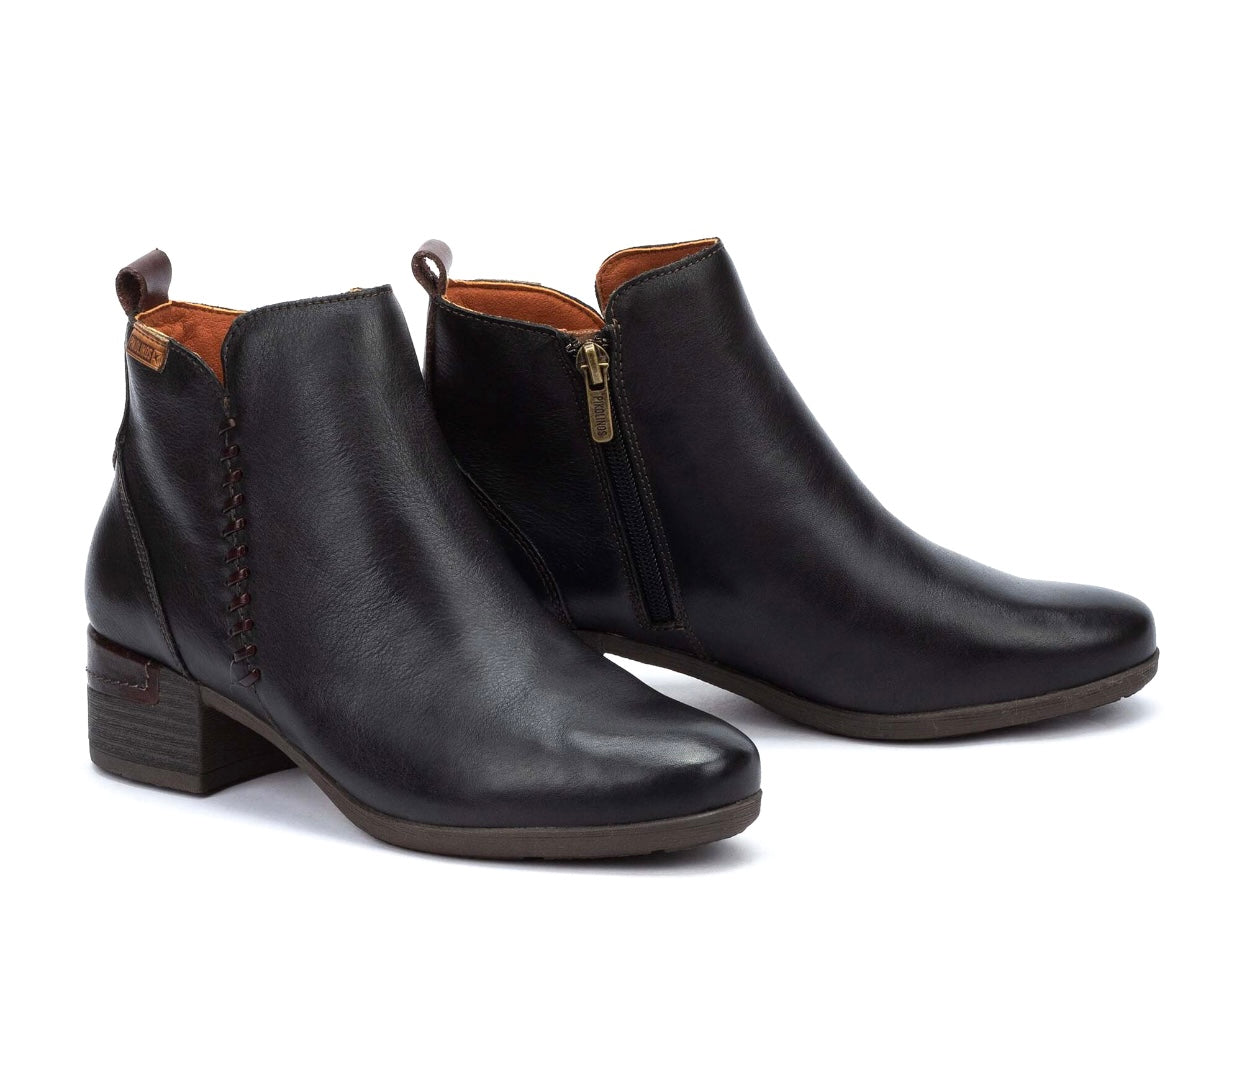 Pikolinos Malaga W6W-8950 Black Zip Ankle Boots Made In Spain